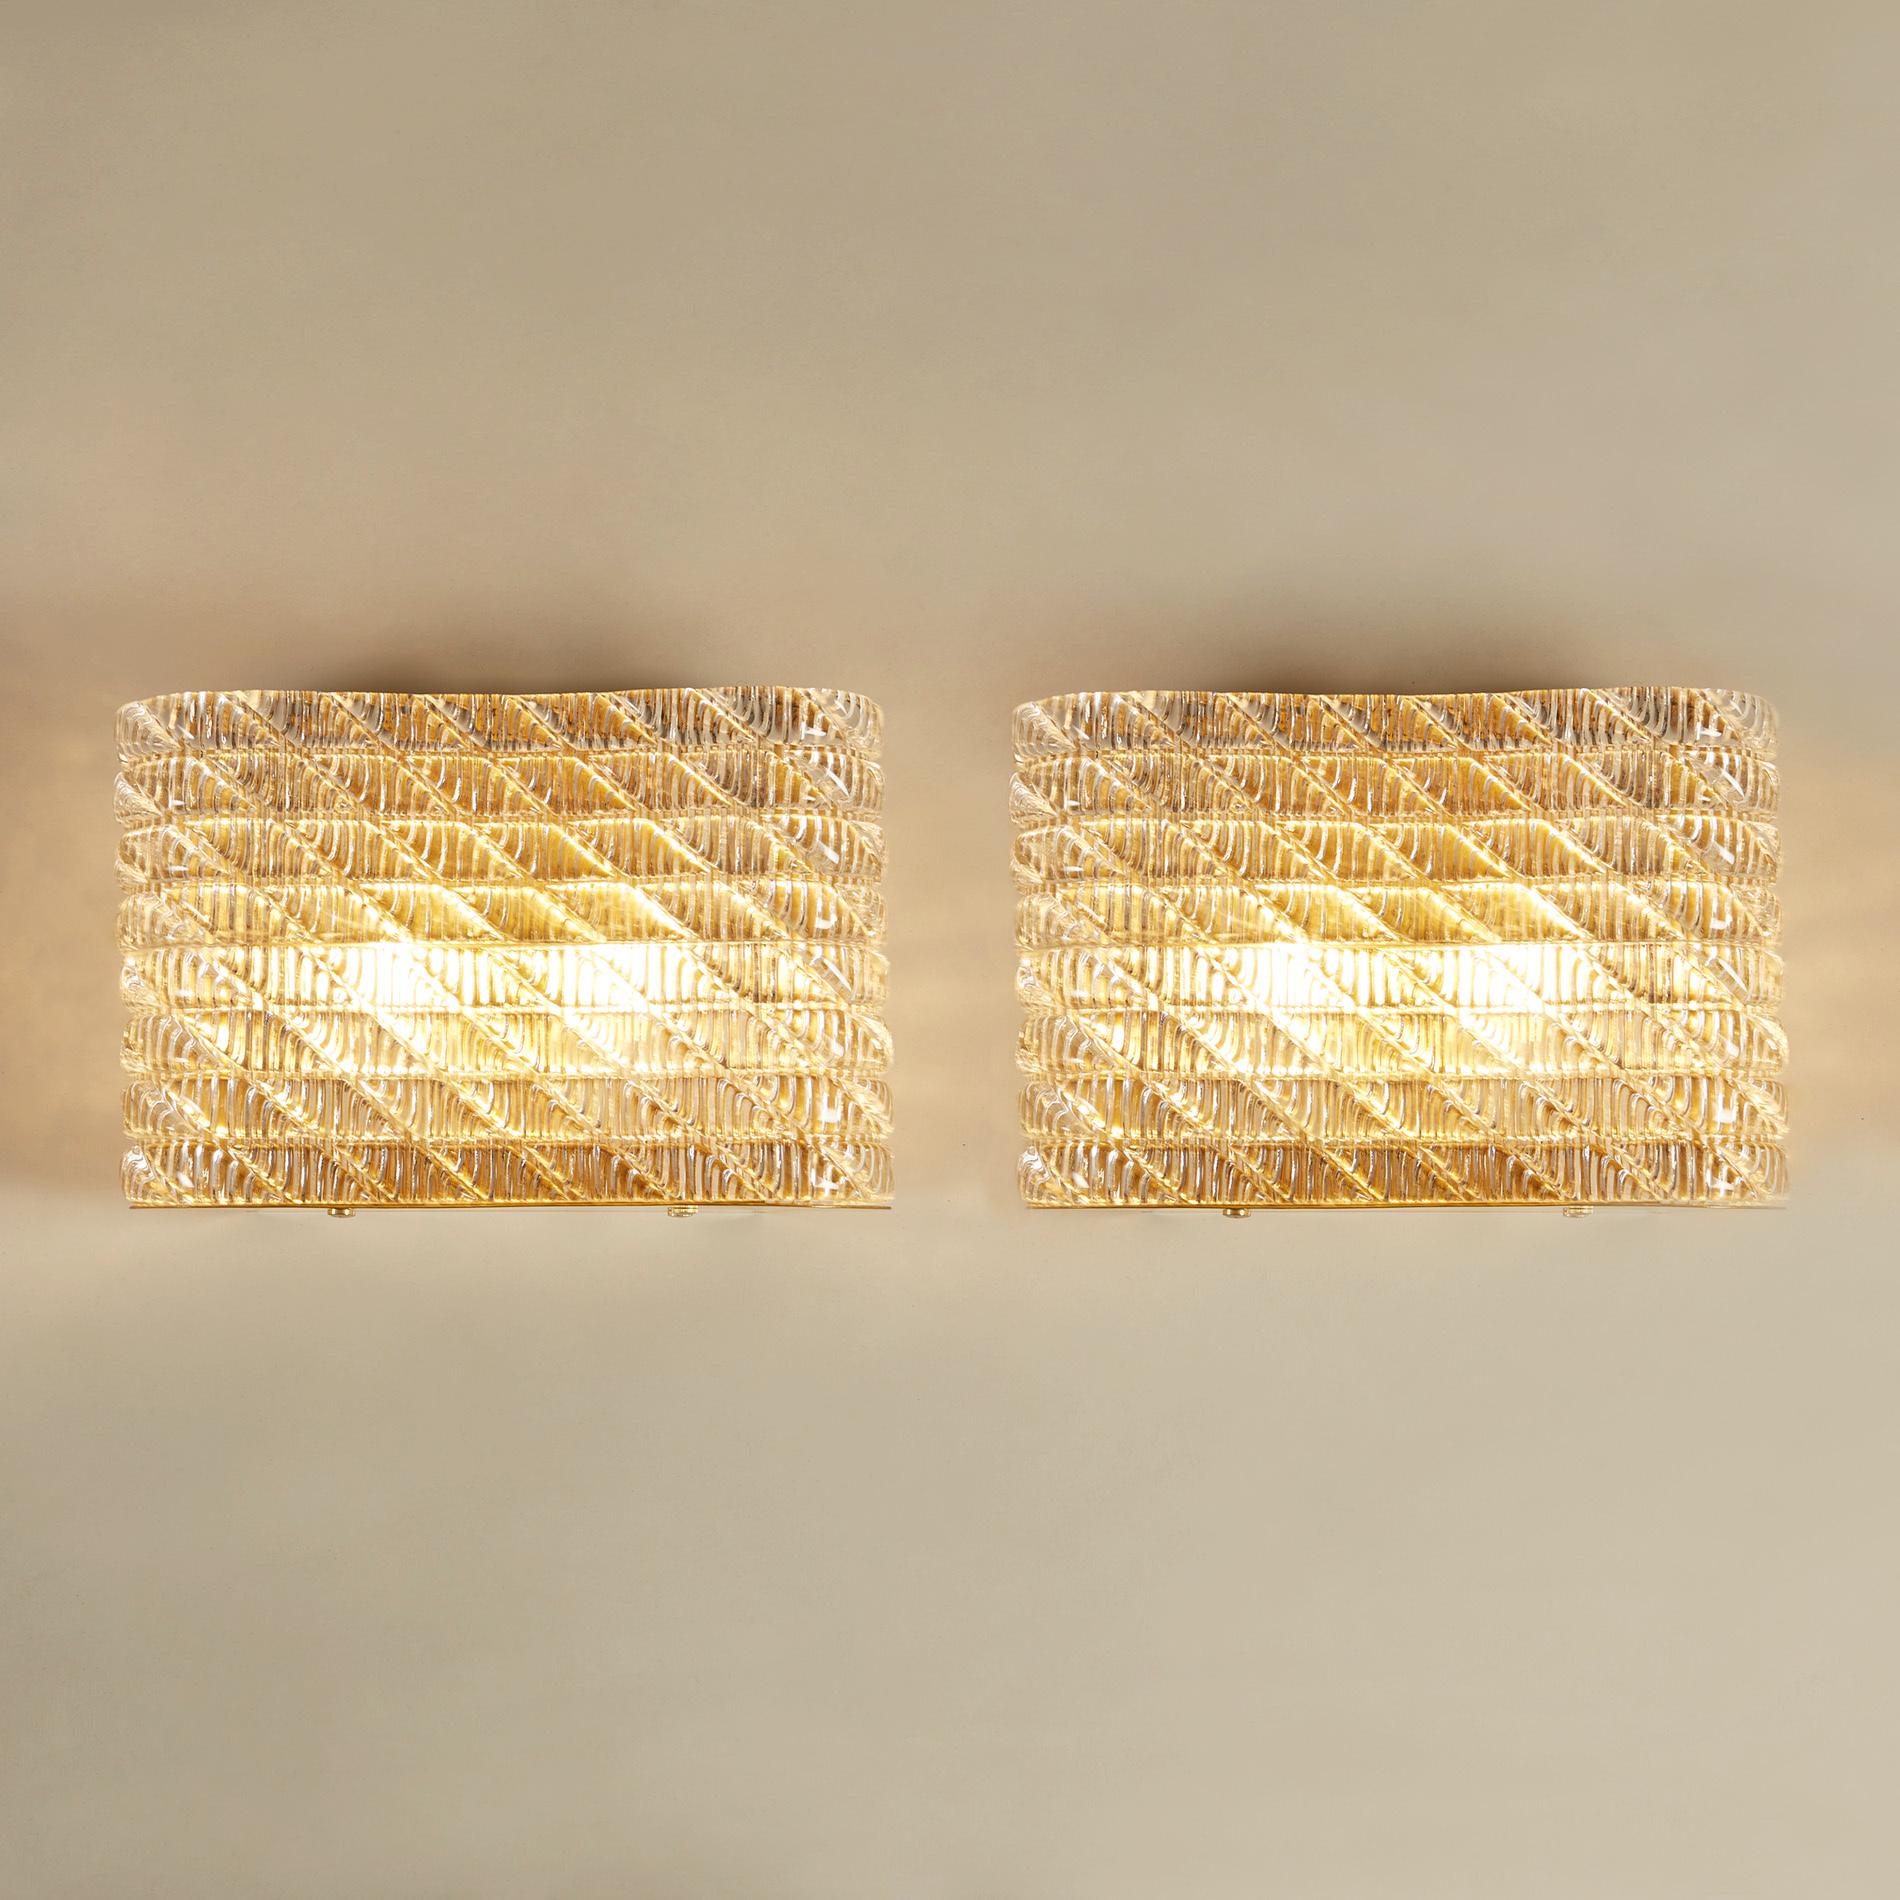 Glamorous large pair of wall lights with curved corners. The criss-crossed Murano glass pattern sits on a curved brass back plate and base, creating a flattering diffused light.

